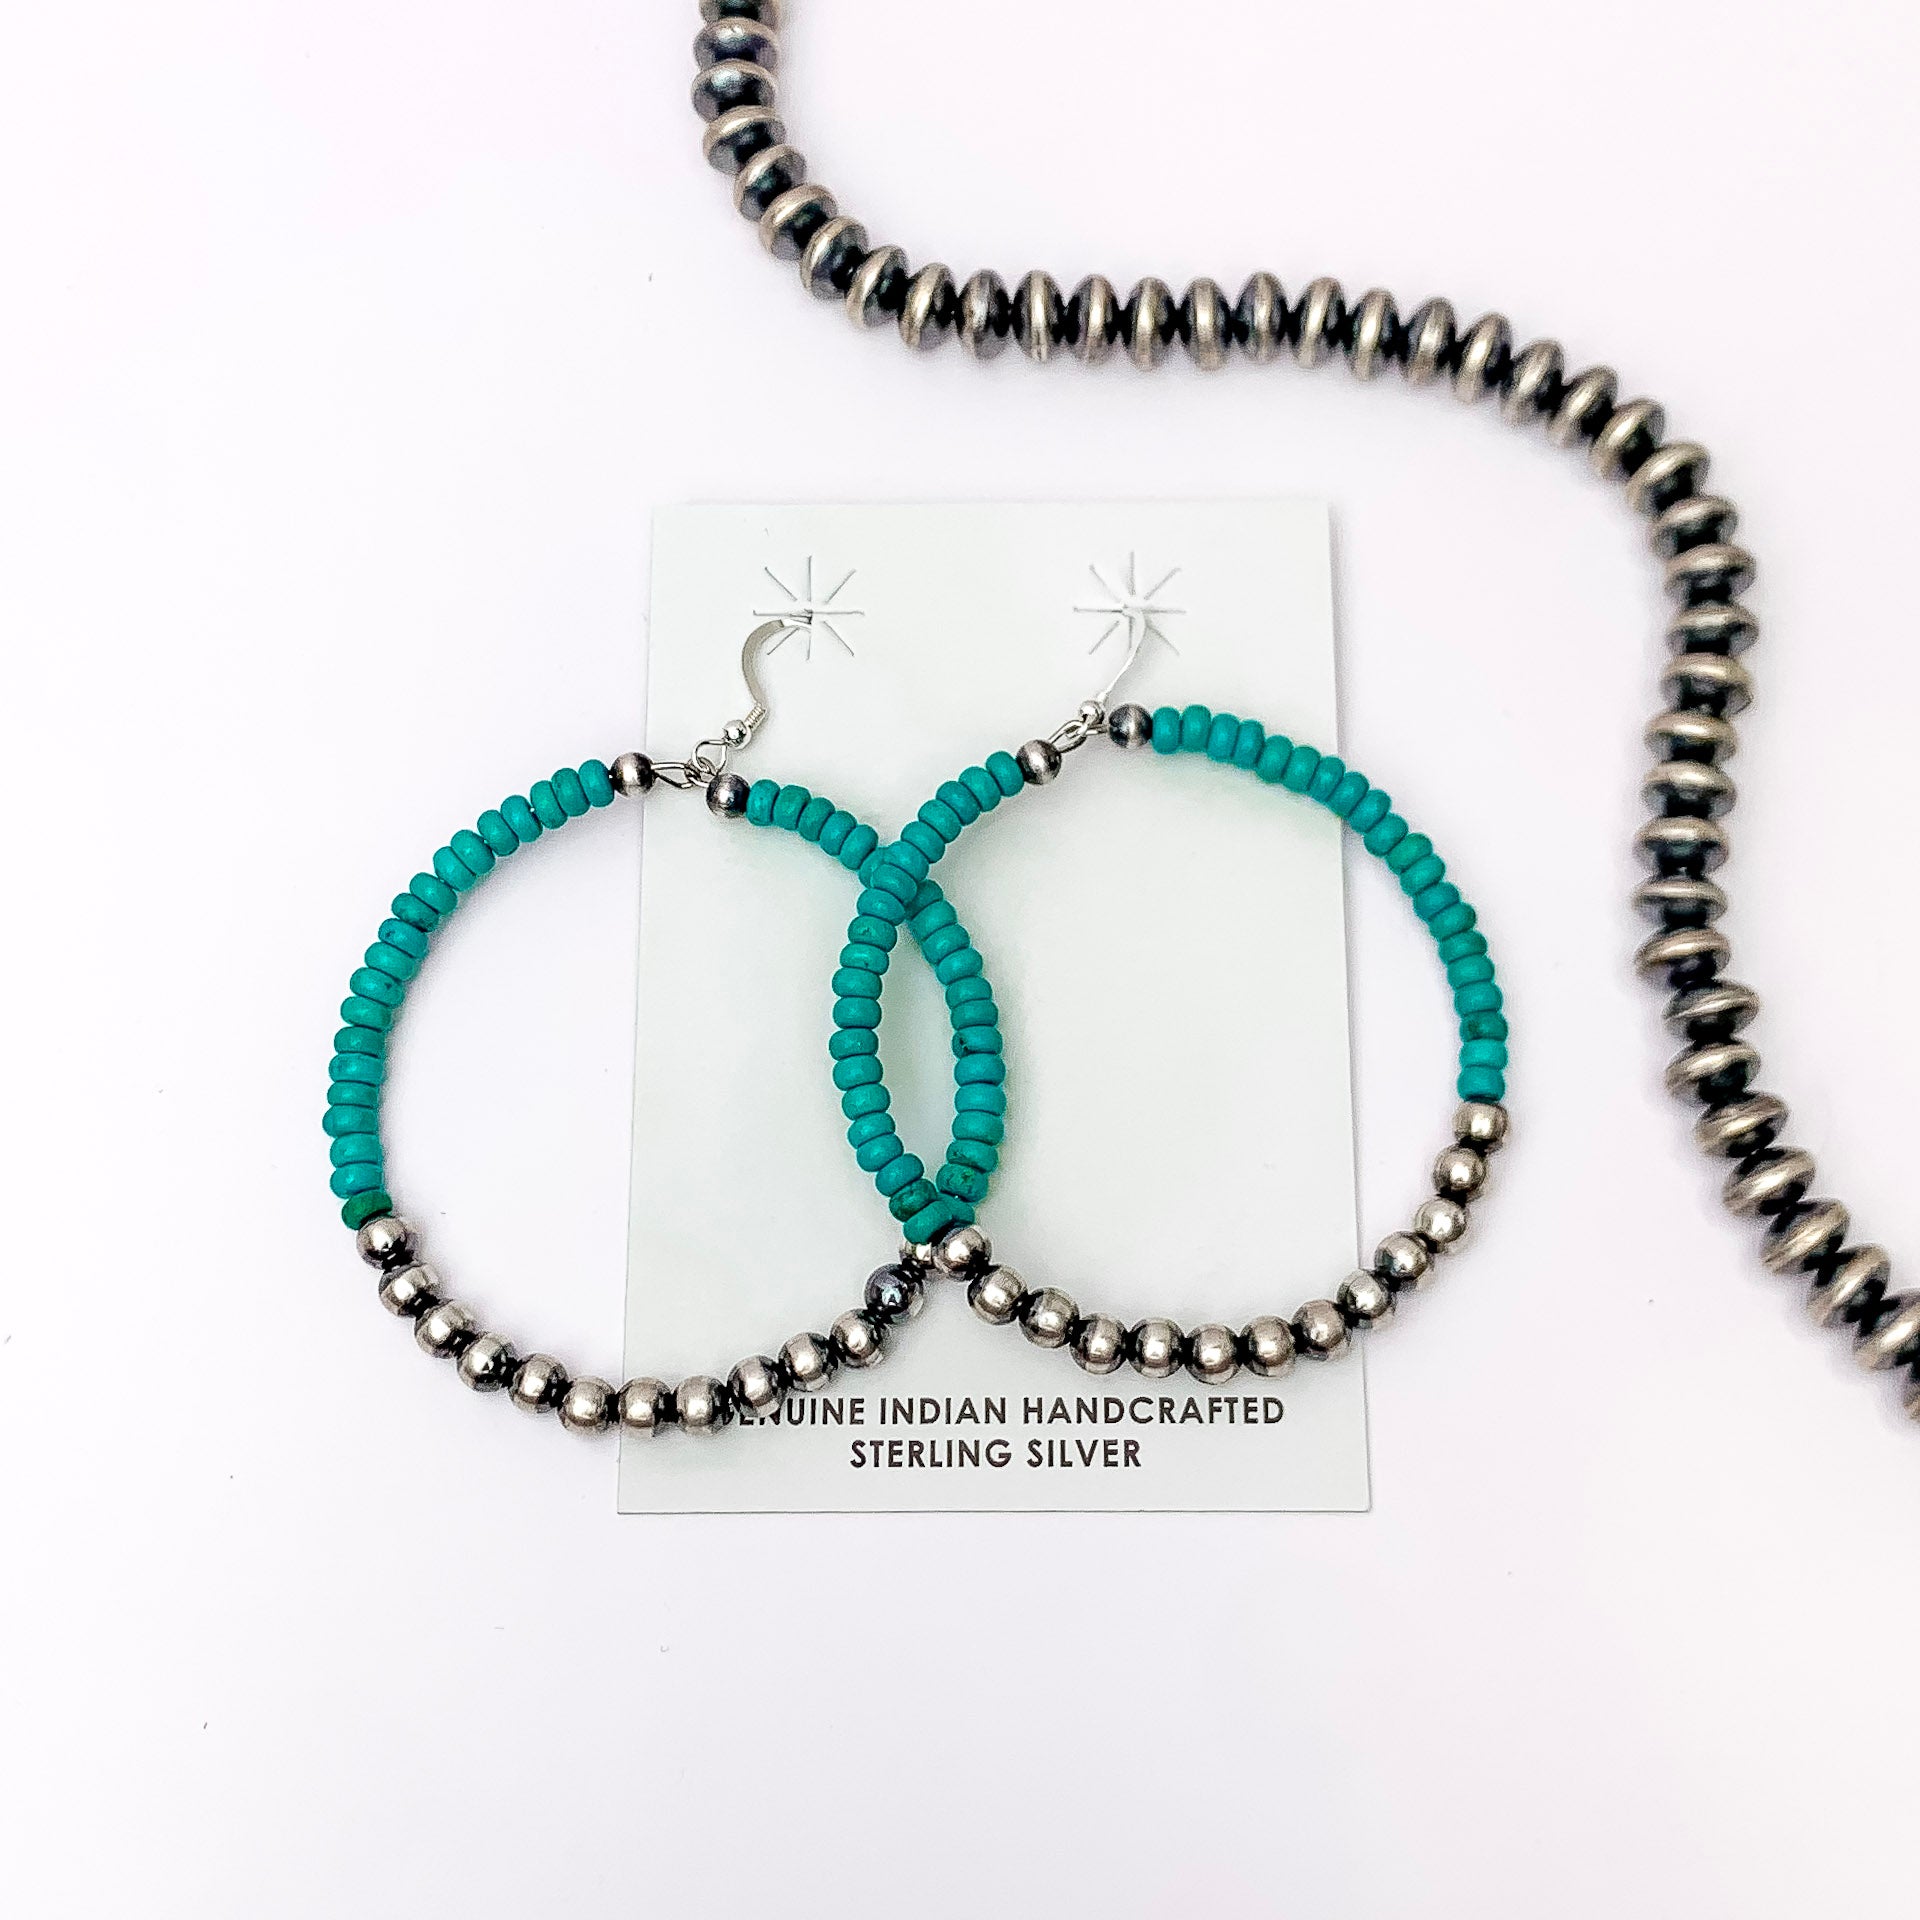 Centered in the picture is a pair of navajo and turquoise hoops on a white background.